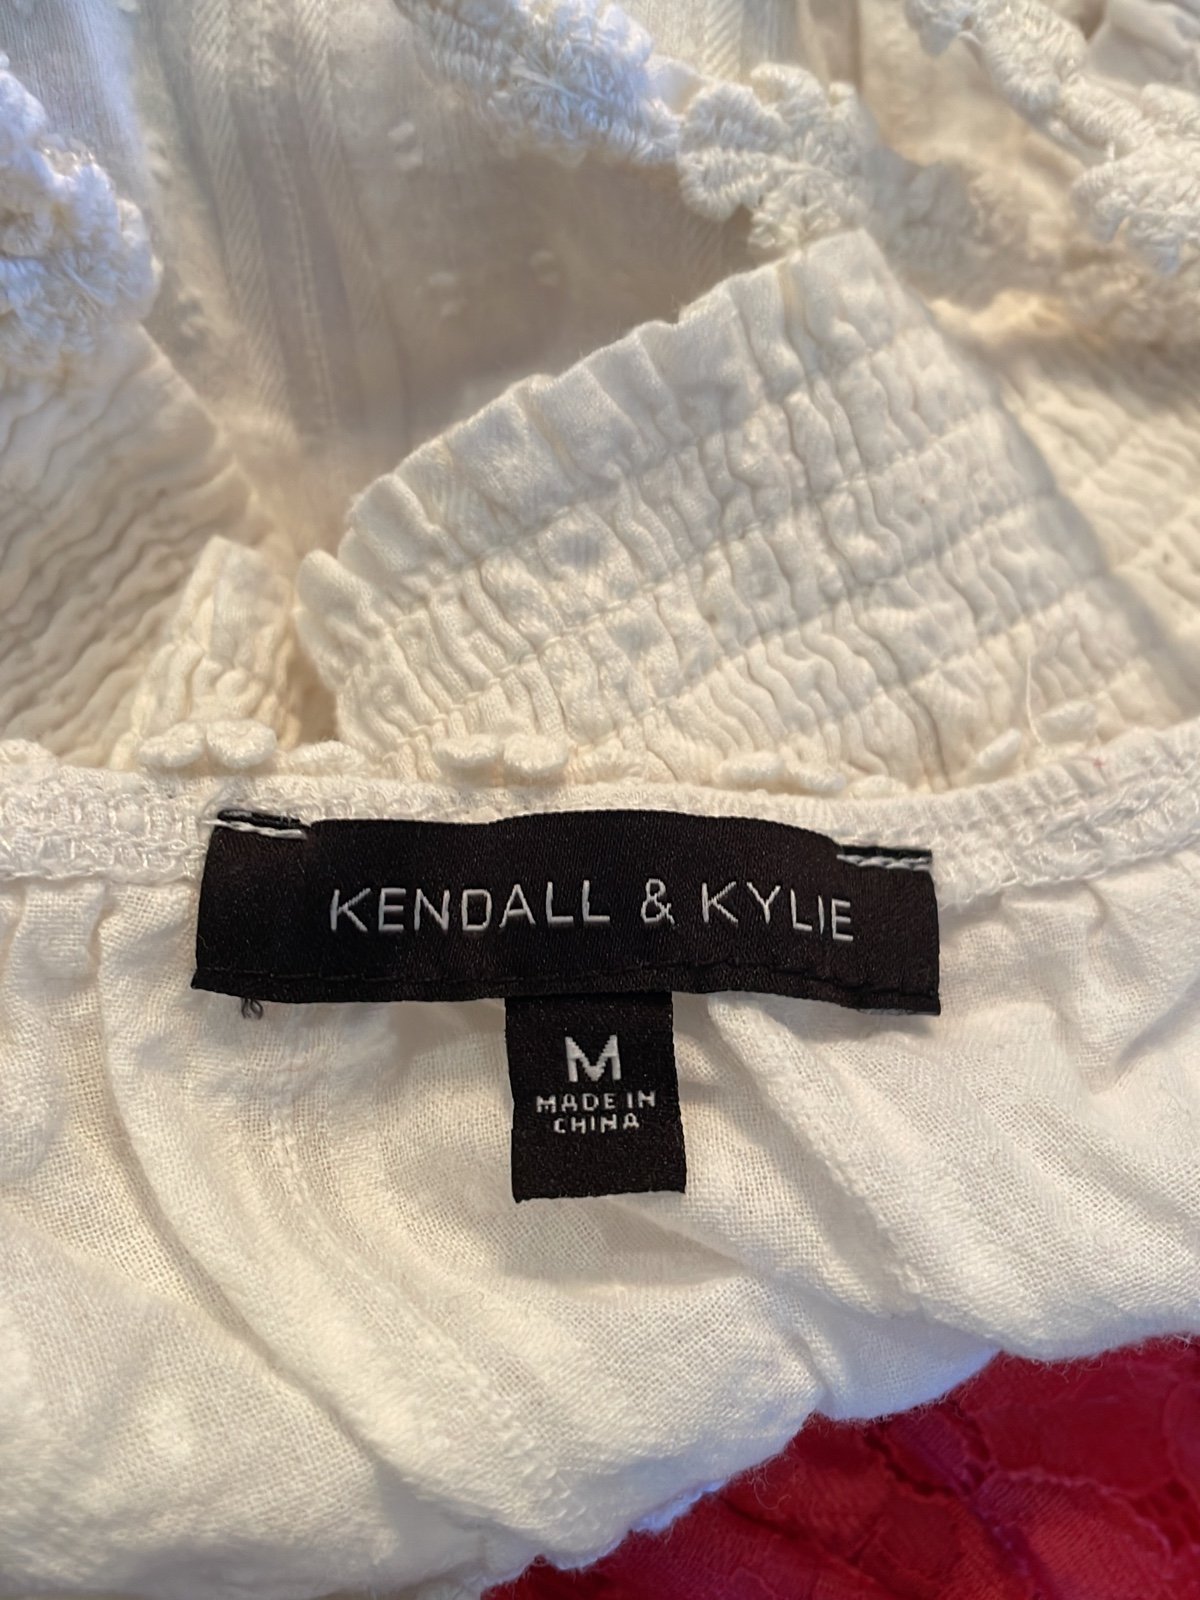 cheapest place to buy  kendall and kylie top ot3hiNsUA best sale